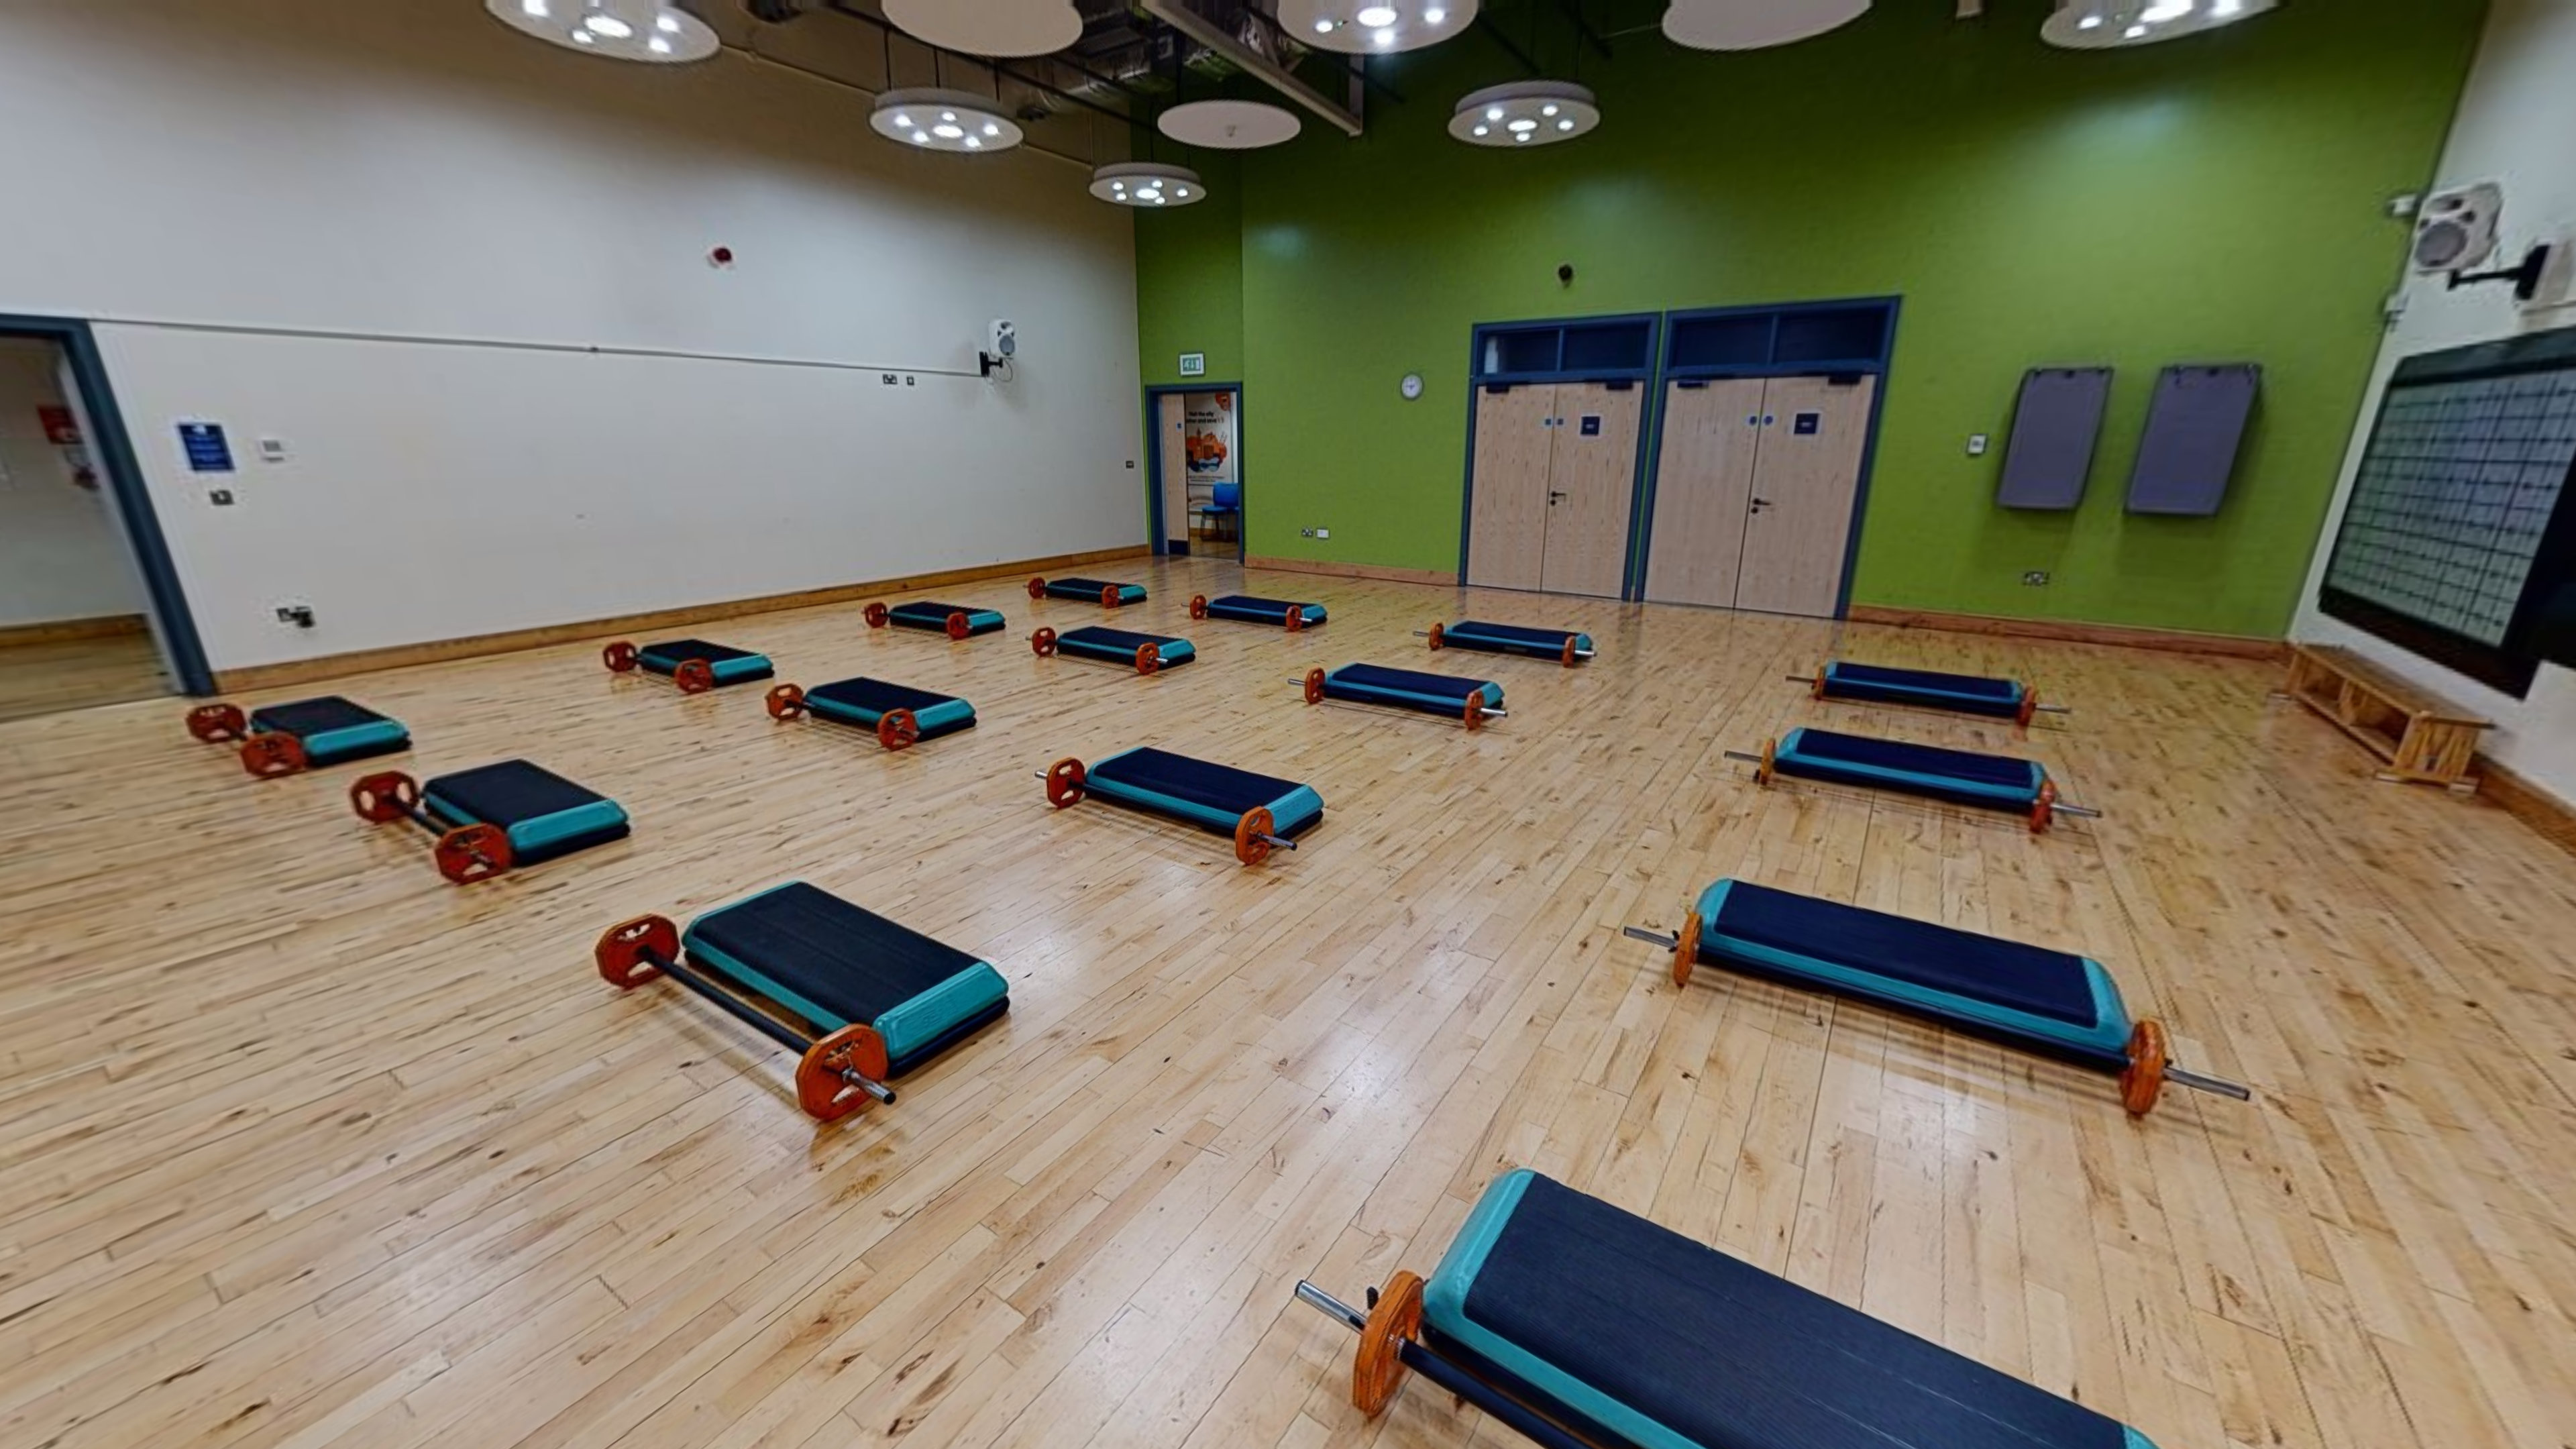 Group exercise studio at Harborne Pool & Fitness Centre Harborne Pool & Fitness Centre Birmingham 01214 286820